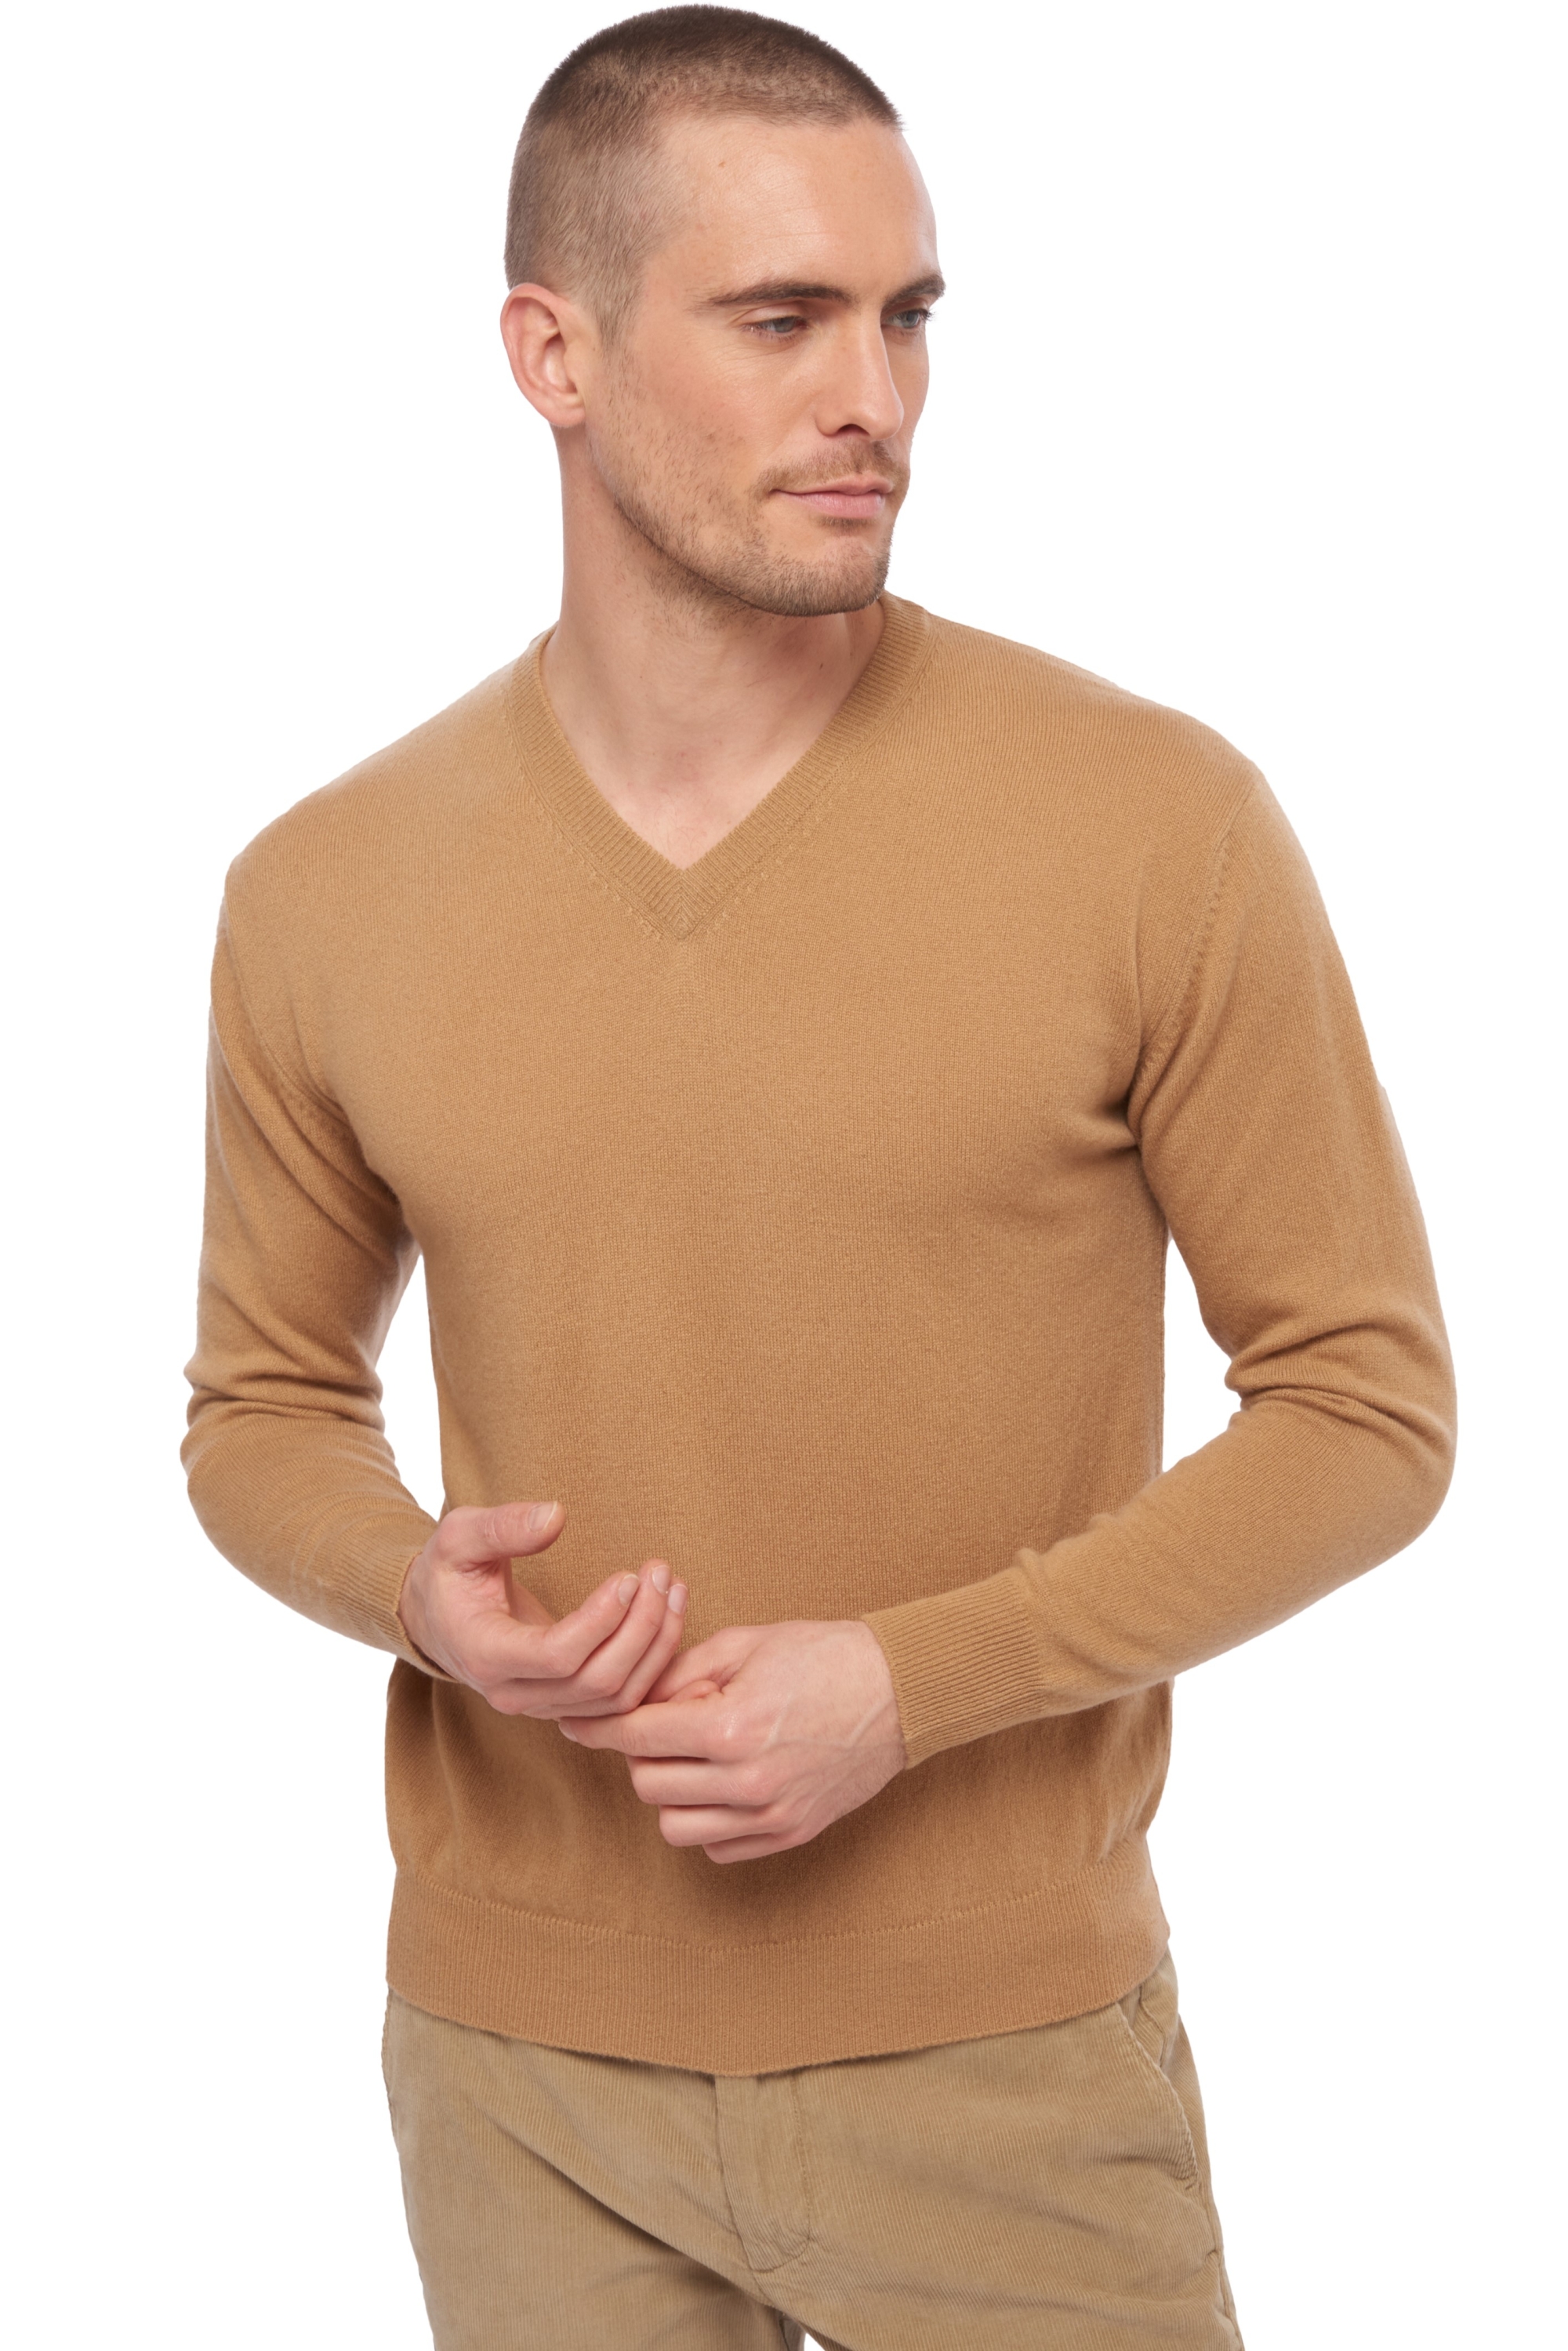 Cachemire pull homme hippolyte camel xl